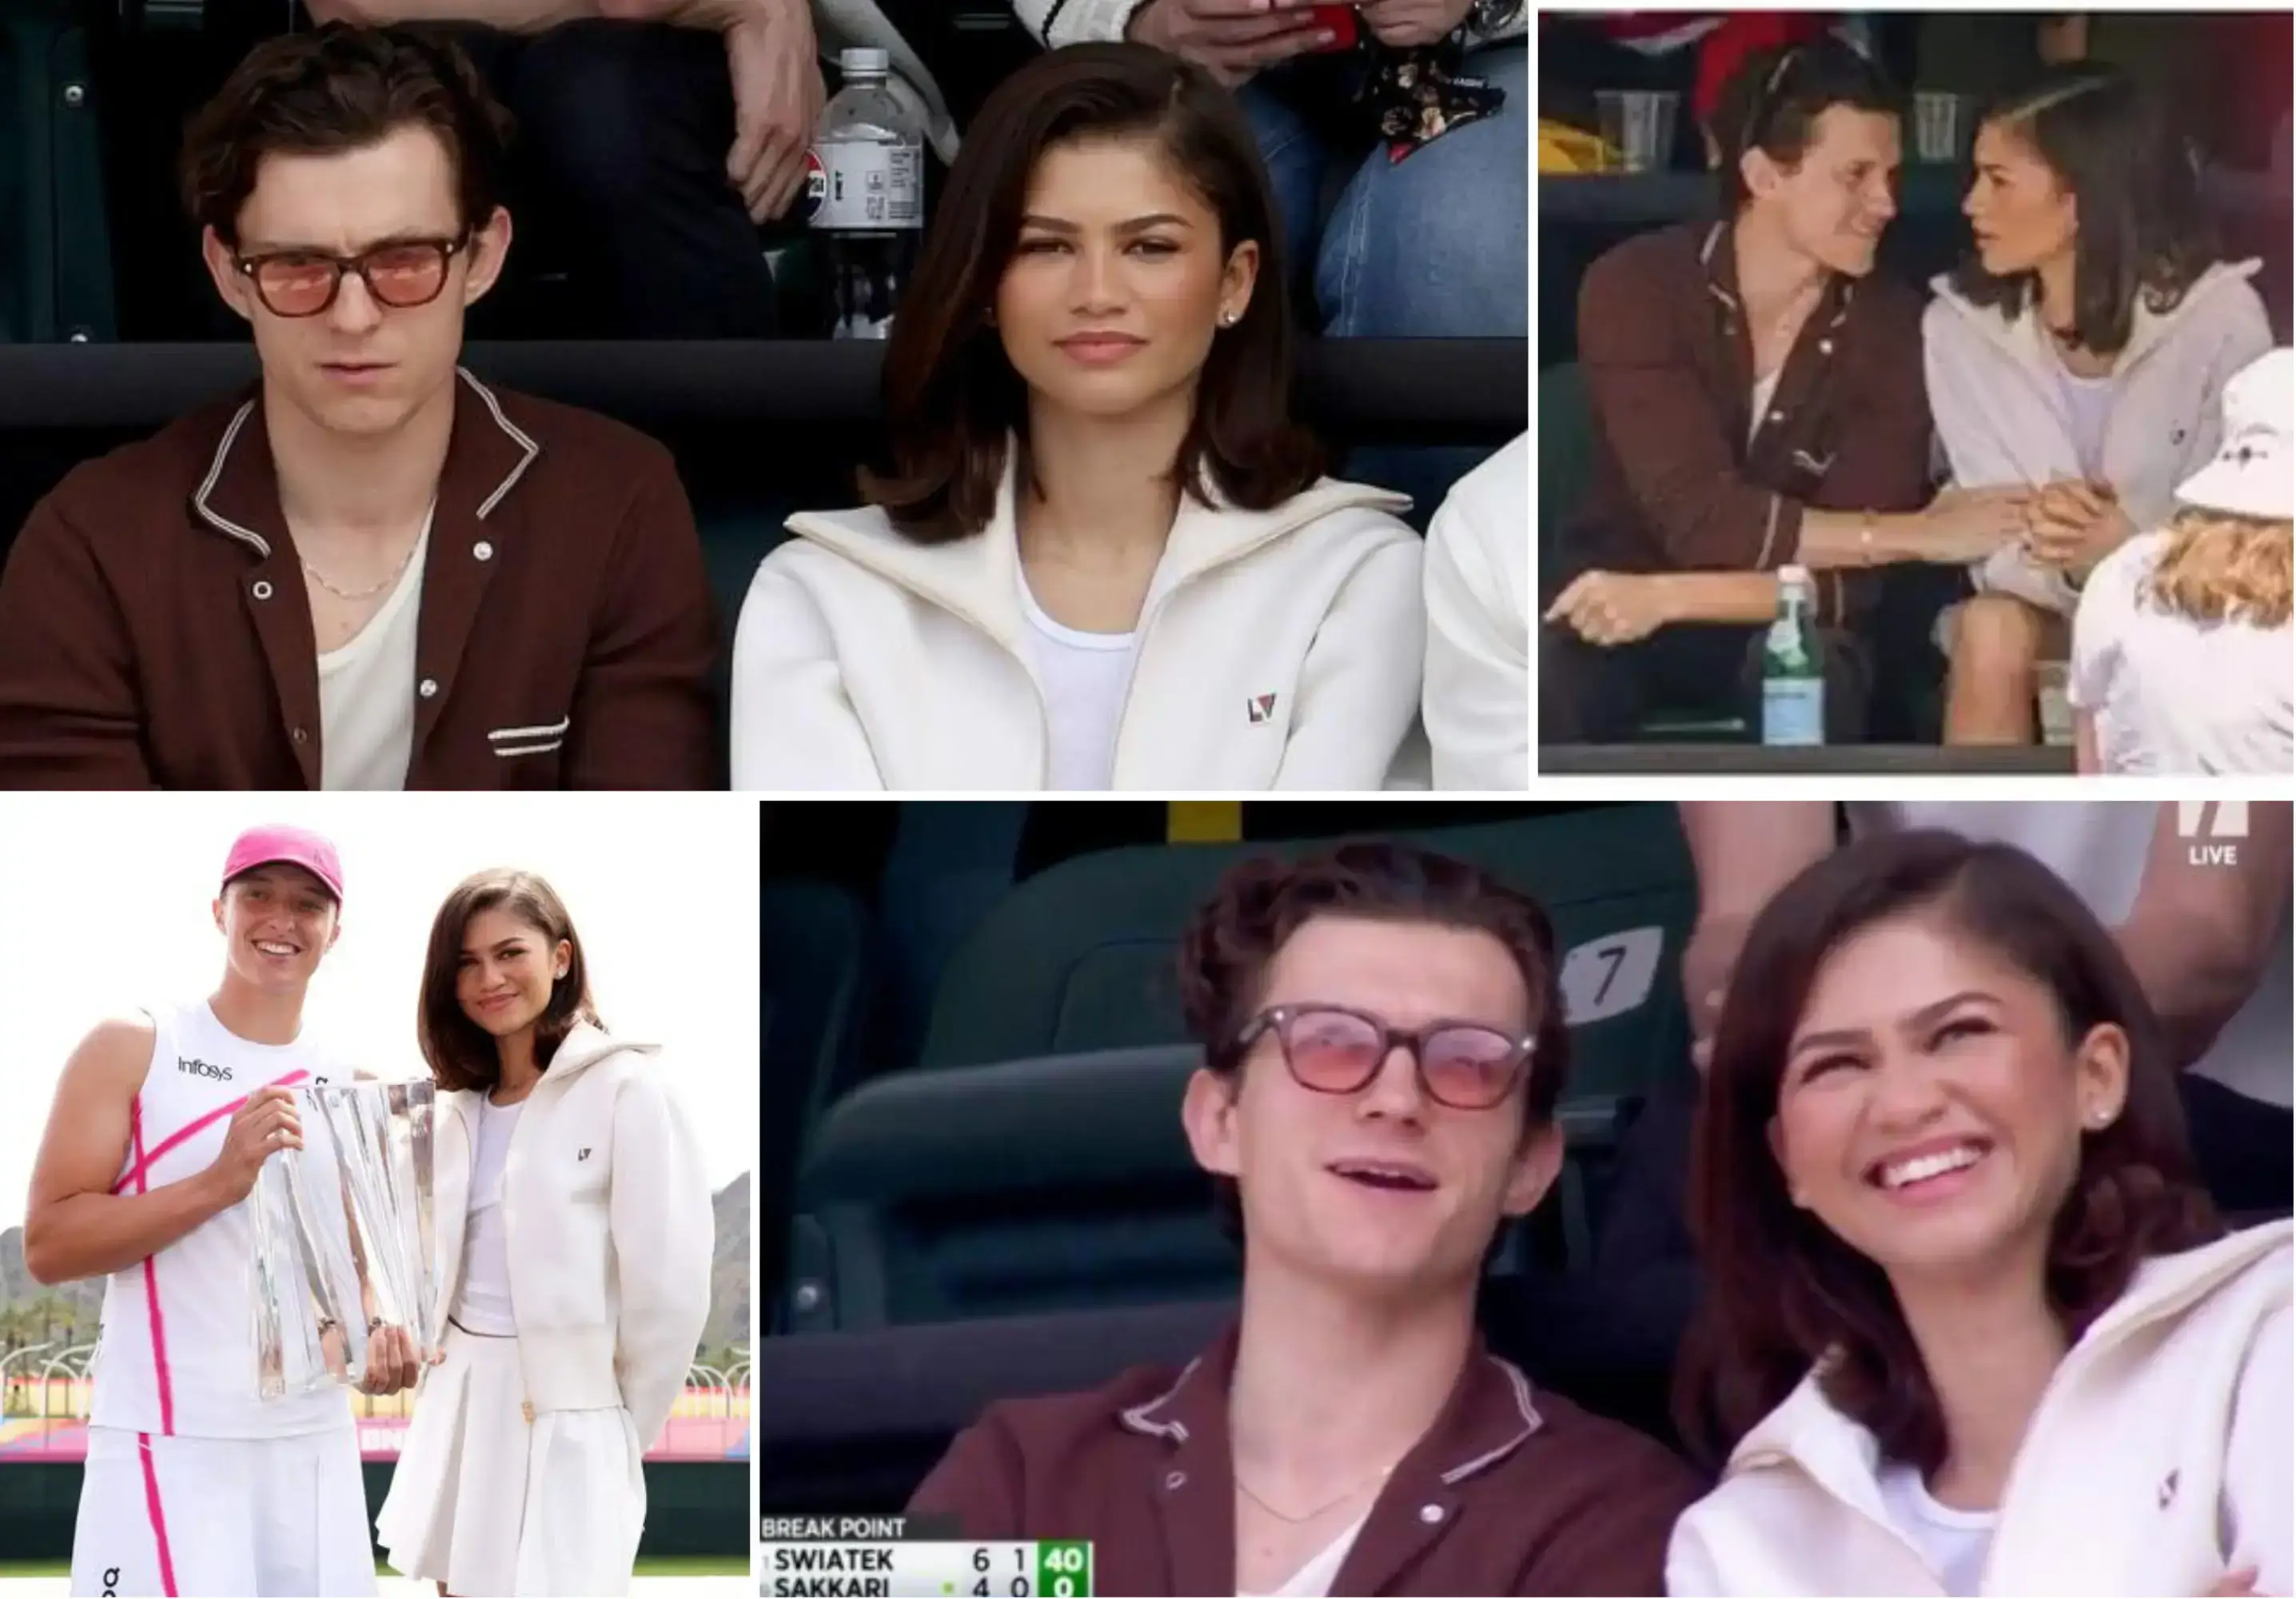 Zendaya and Tom Holland on a Tennis Date in California